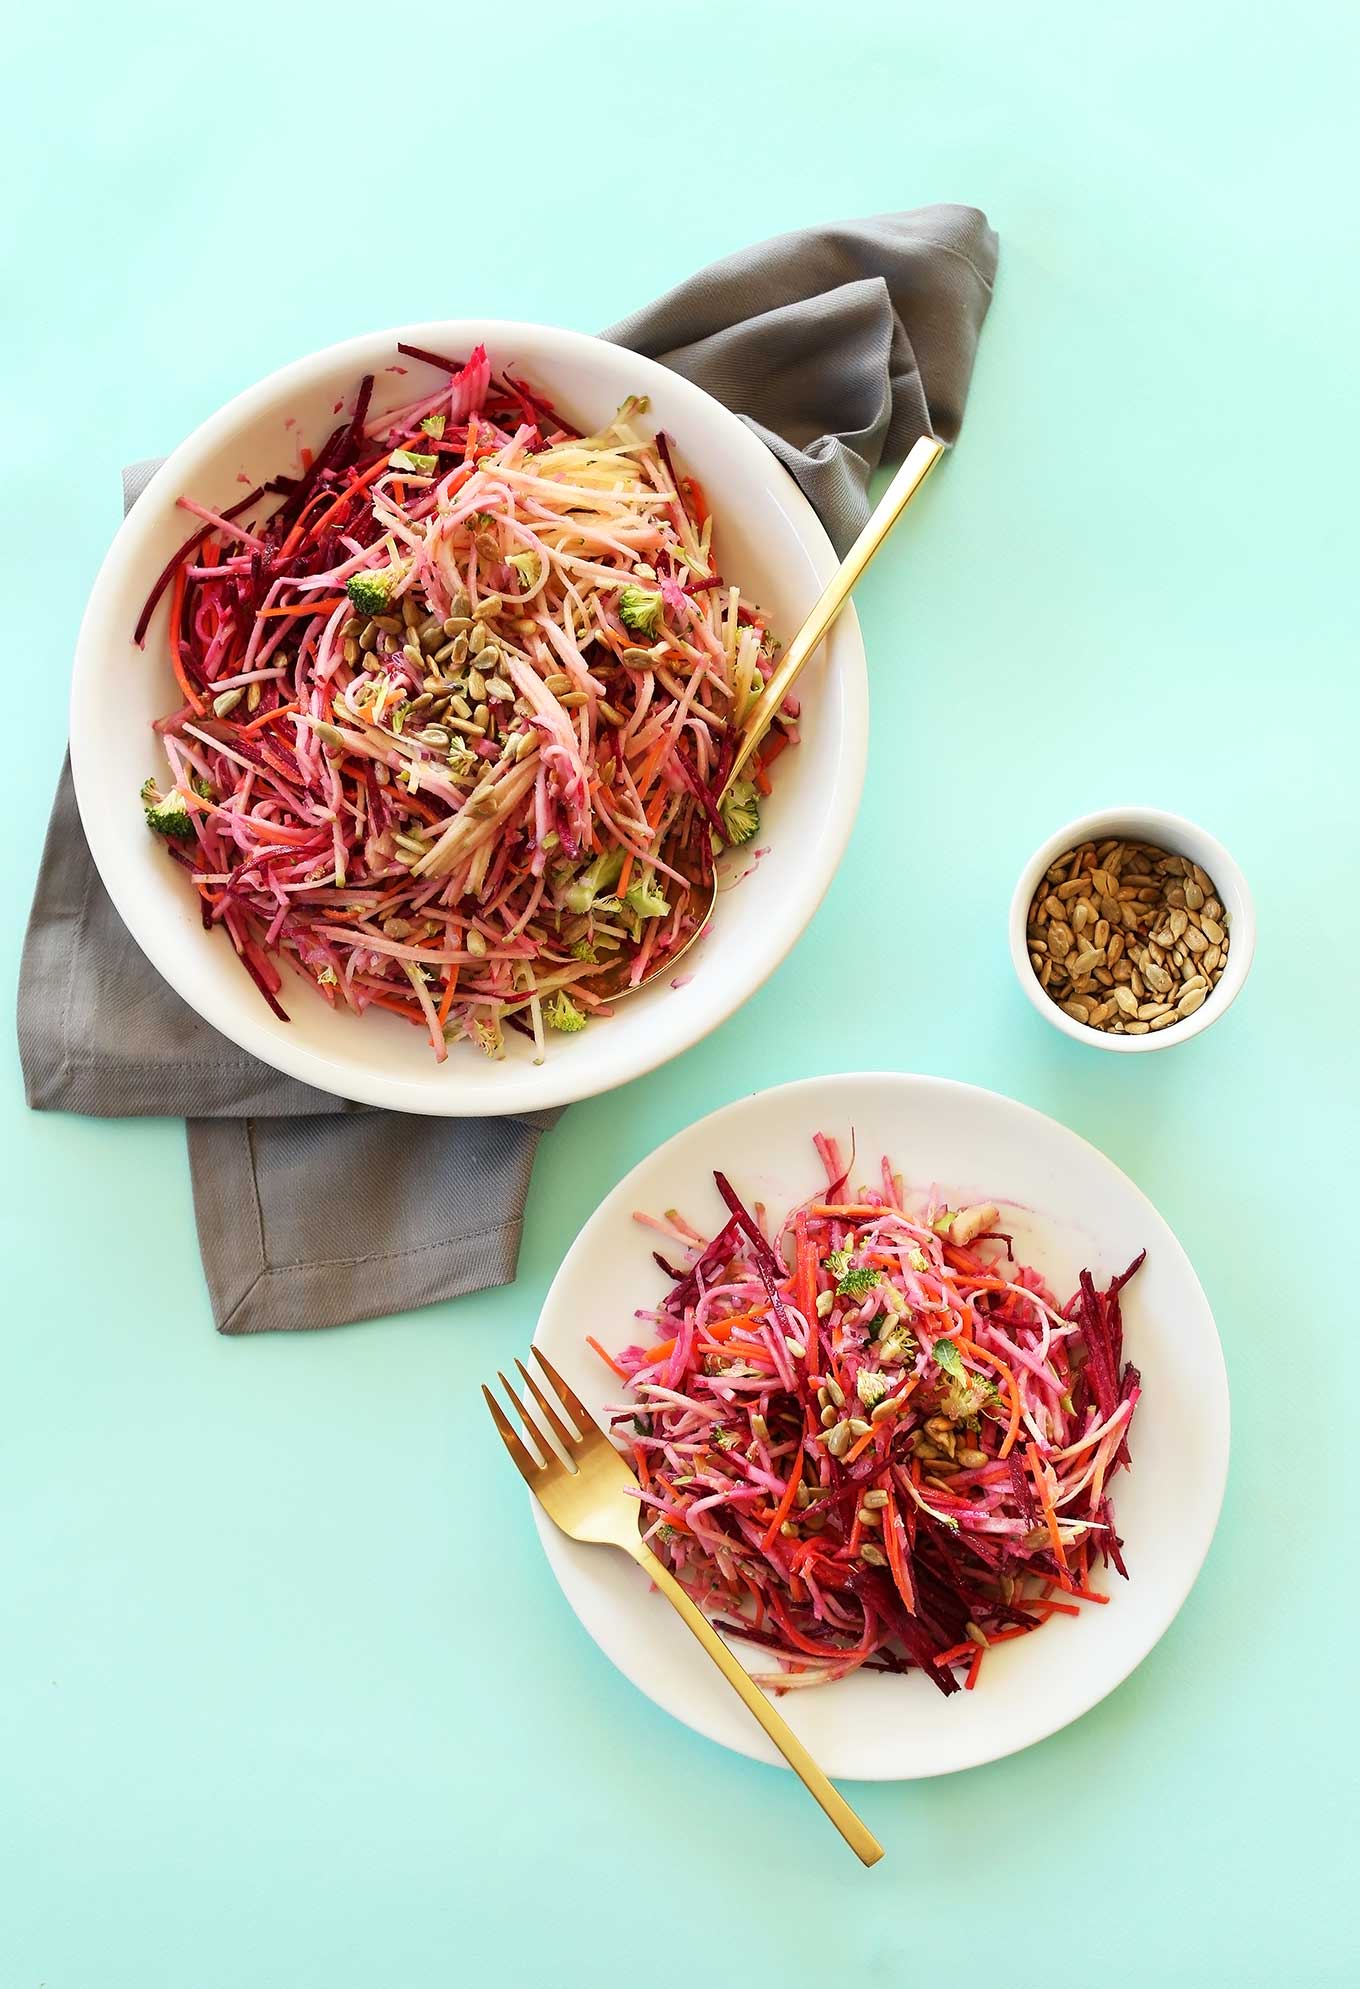 Plate and big bowl of colorful fall slaw with a tangy vegan dressing